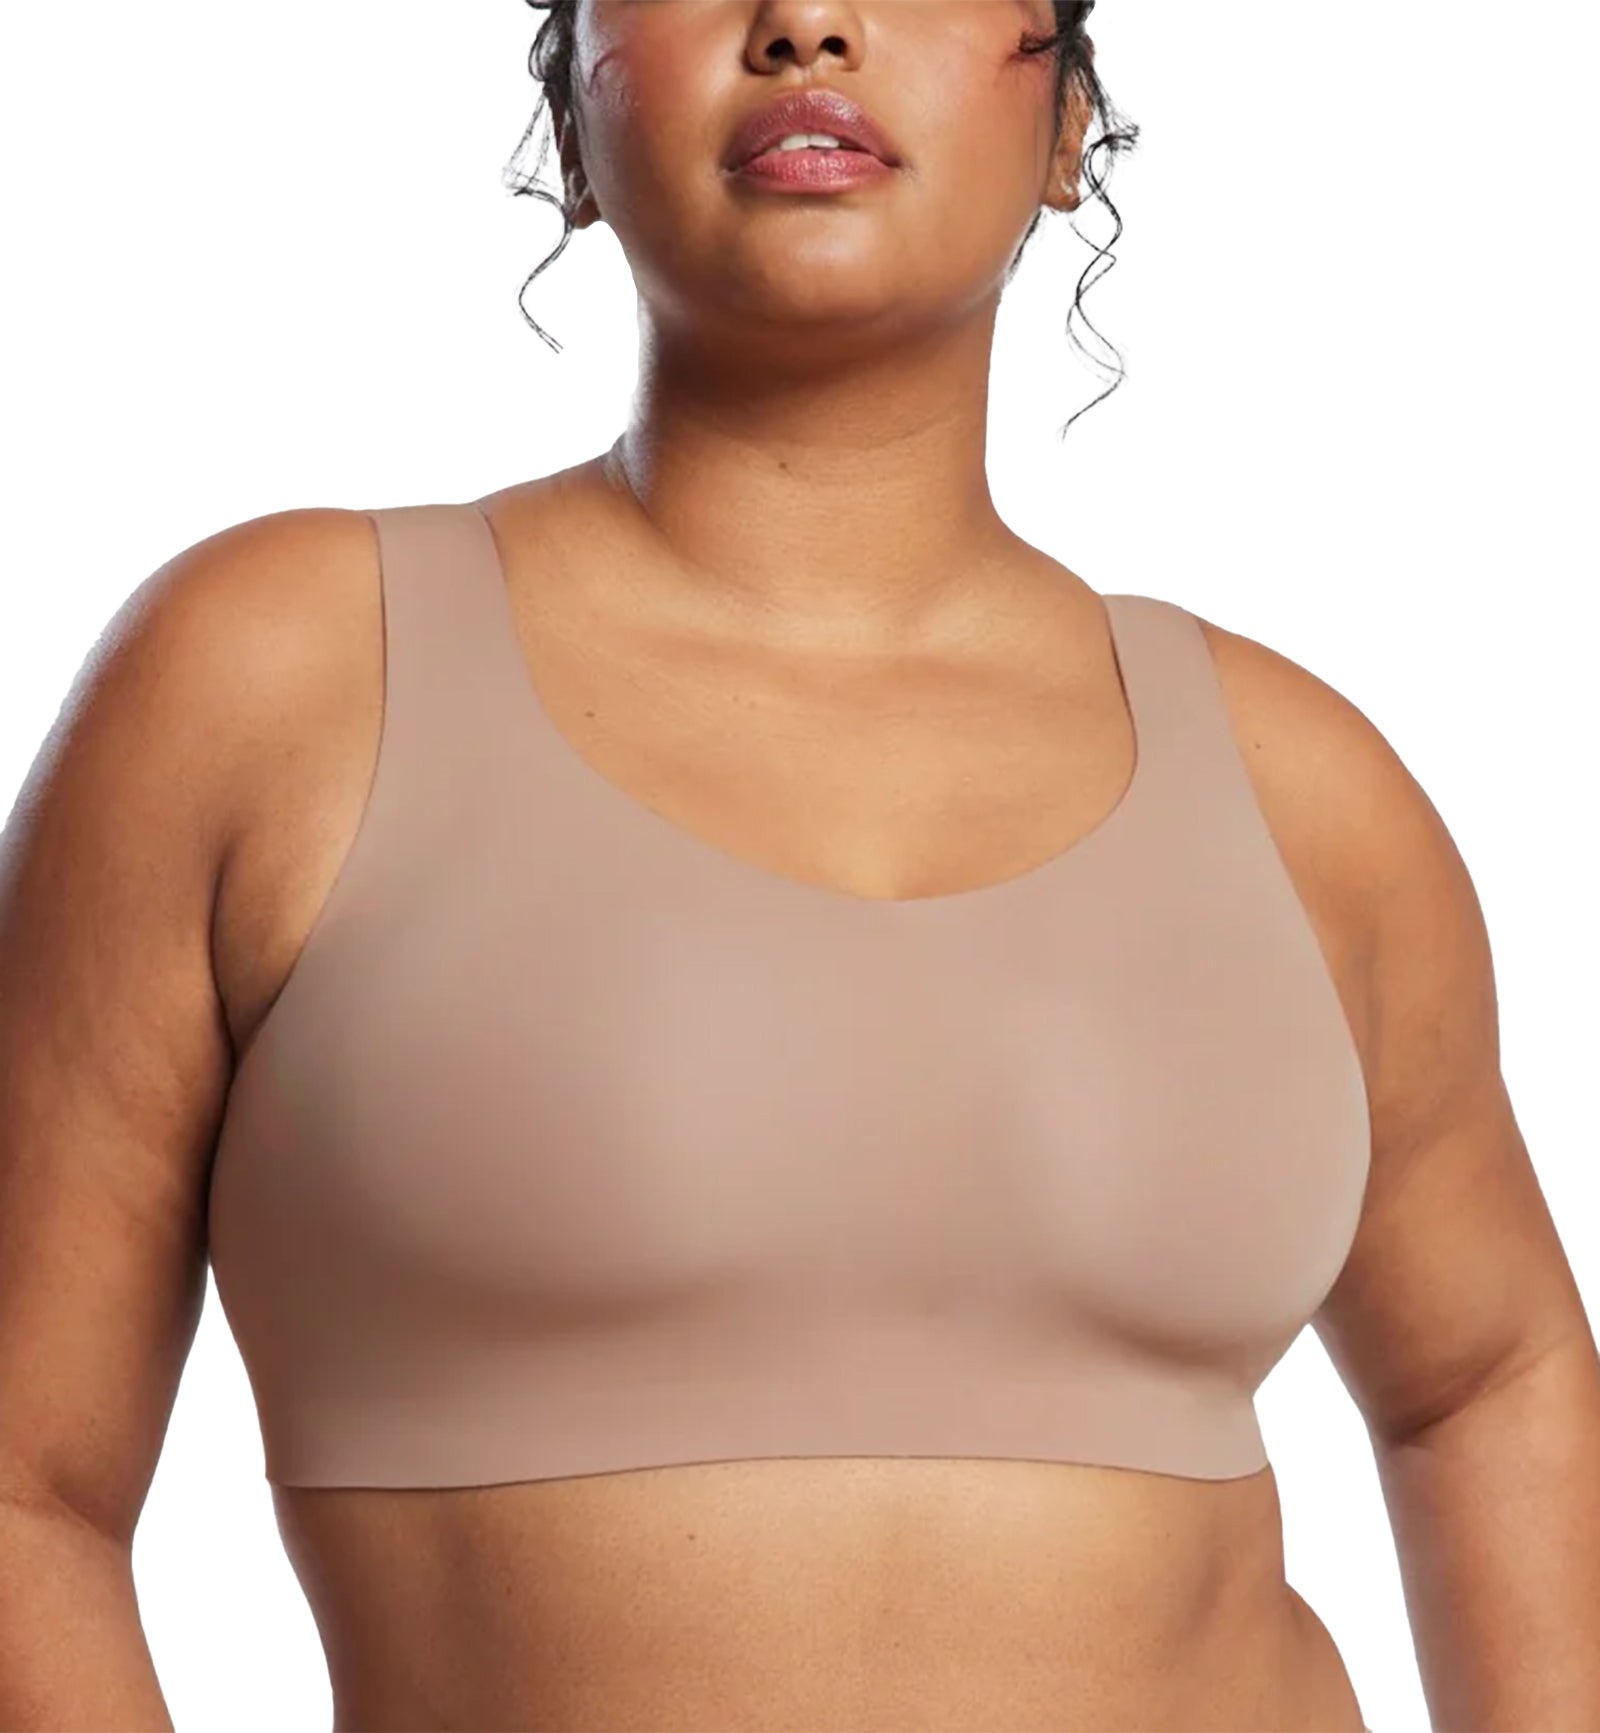 Evelyn & Bobbie DEFY V-Neck Bralette w/ Removable Pads (1728﻿),Small,Willow - Willow,Small